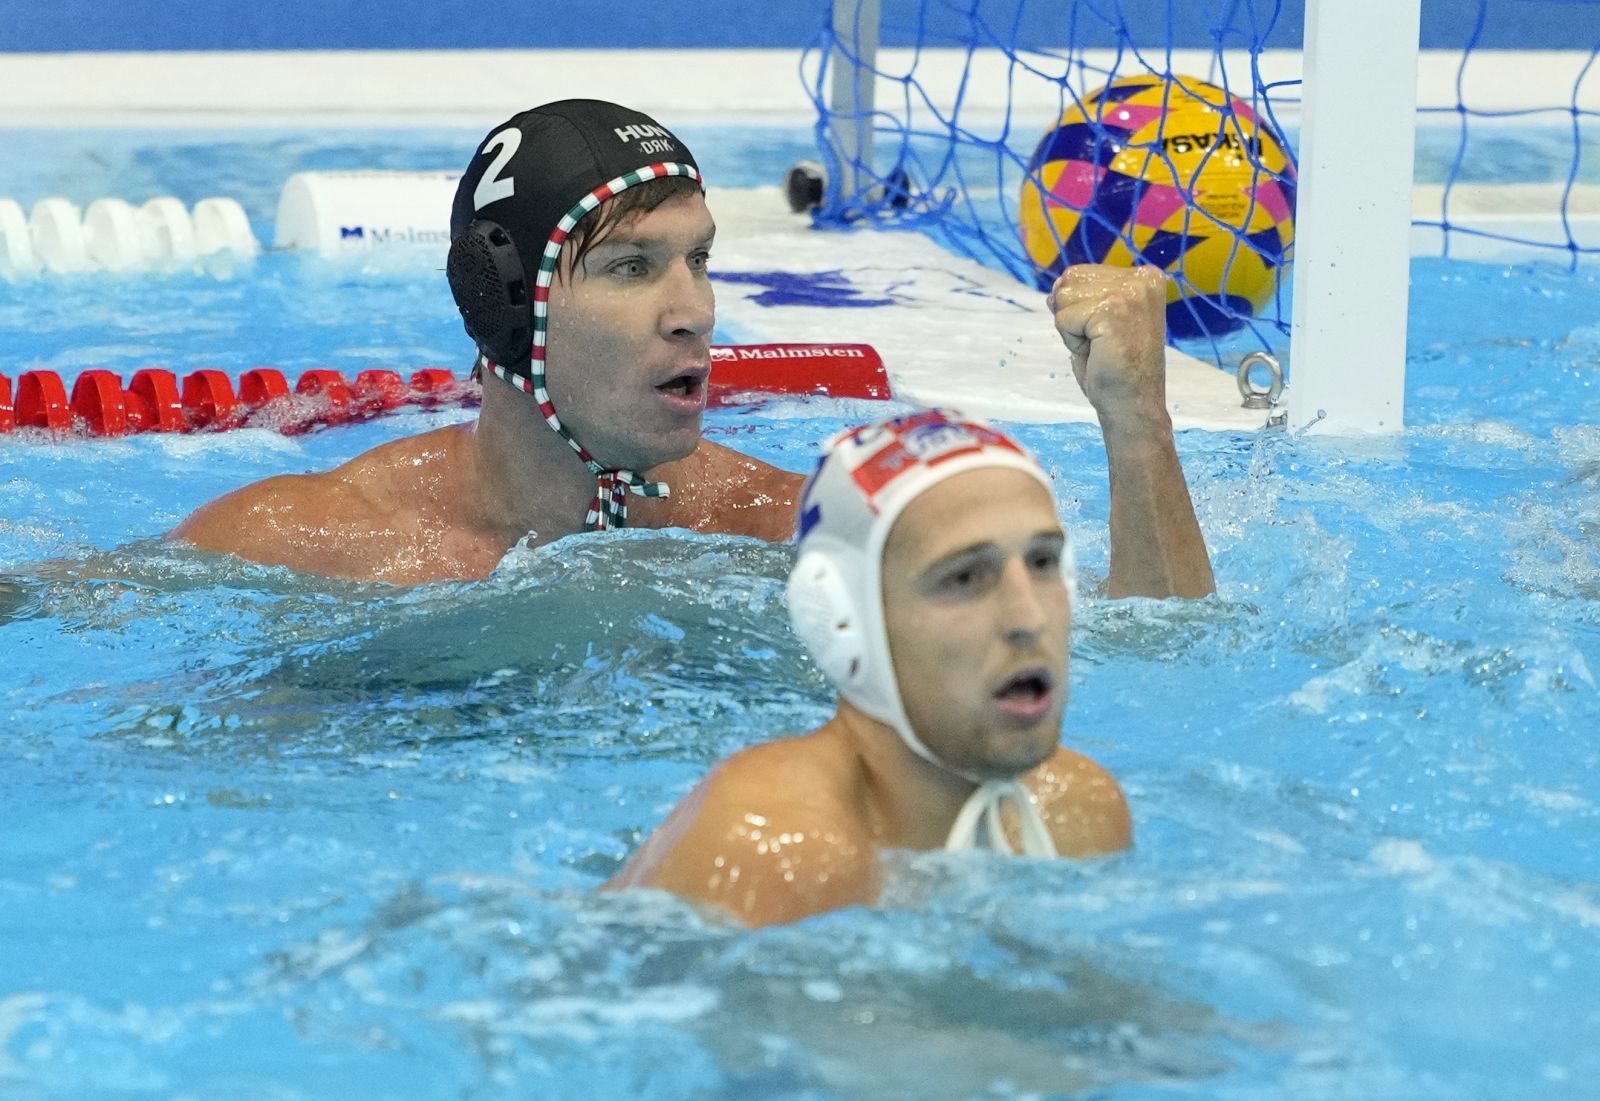 epa10754703 Daniel Angyal (L) of Hungary reacts after scoring a goal at the Men's Water Polo preliminary round match between Croatia and Hungary during the World Aquatics Championships 2023 in Fukuoka, Japan, 19 July 2023.  EPA/FRANCK ROBICHON